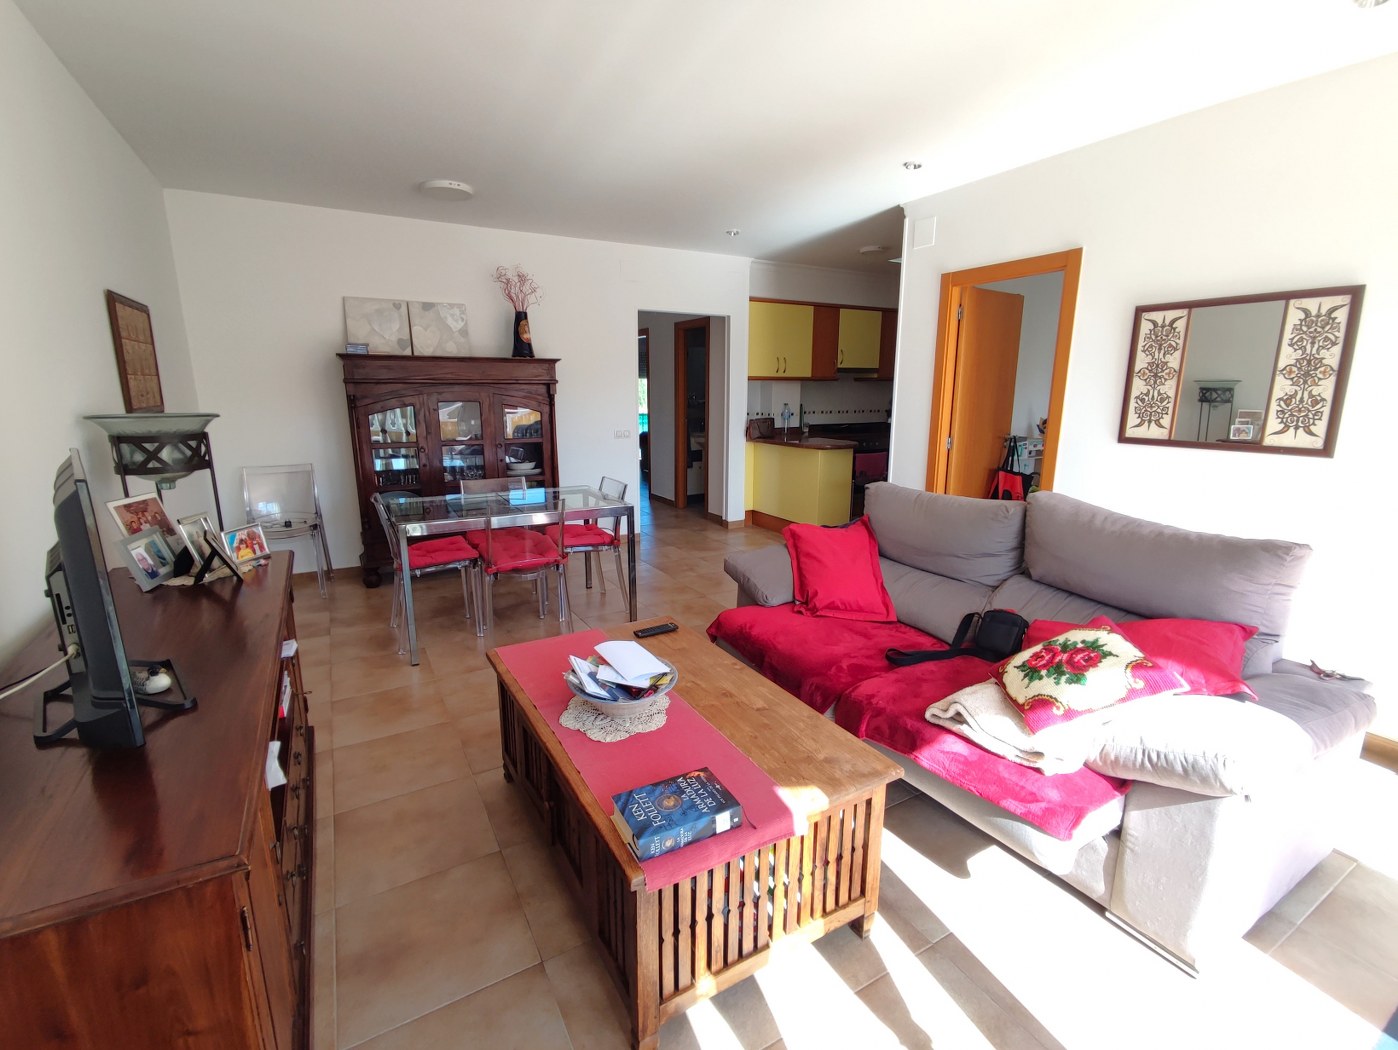 Sunny apartment with 3 bedrooms and communal pool in Els Poblets, Costa Blanca